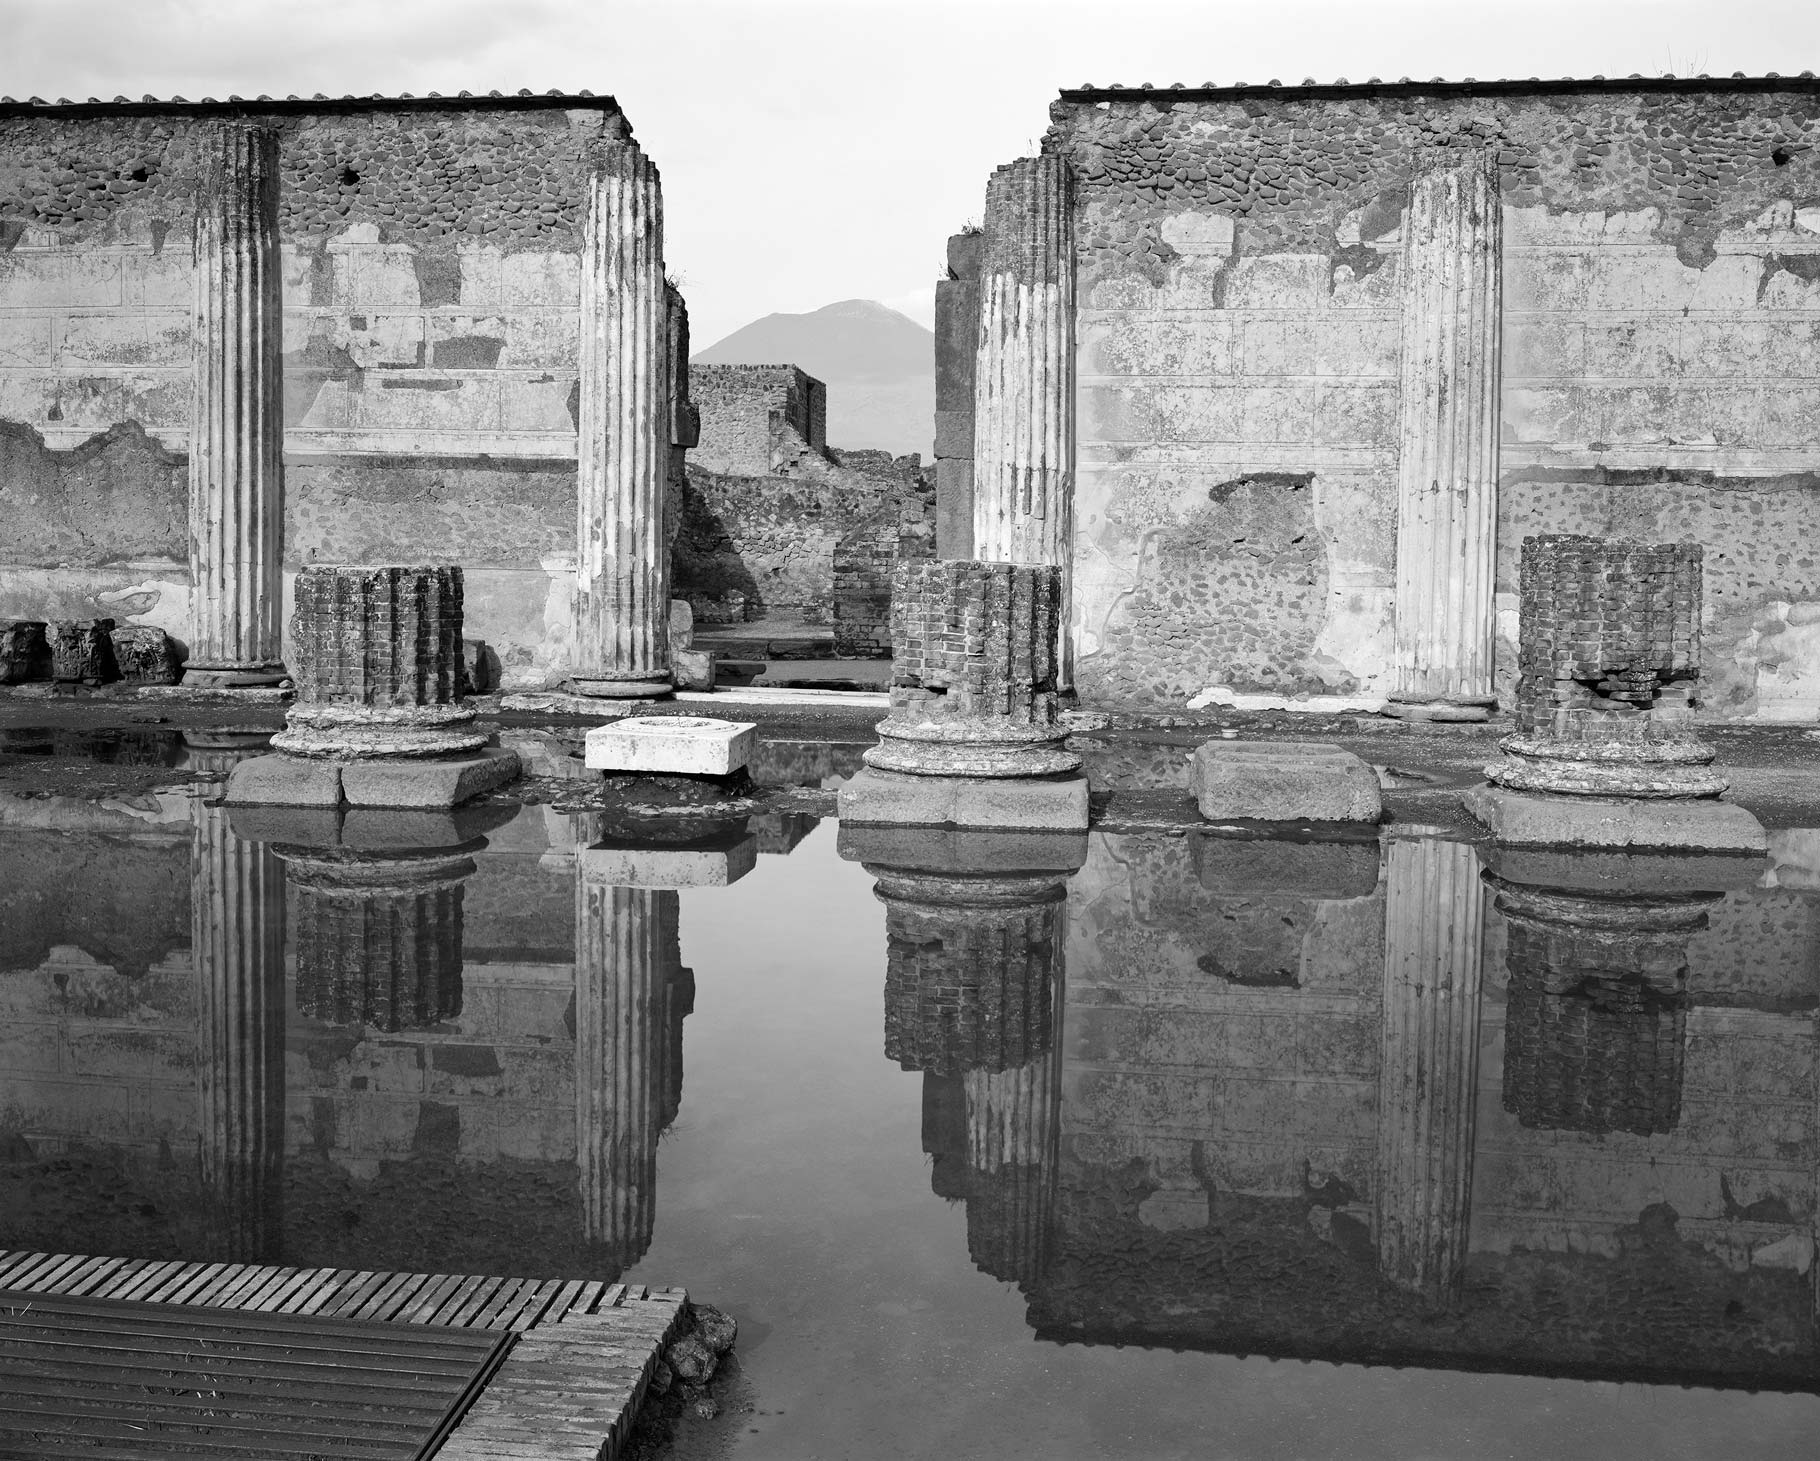 Broken pillars and wall in pompeii, black and white image